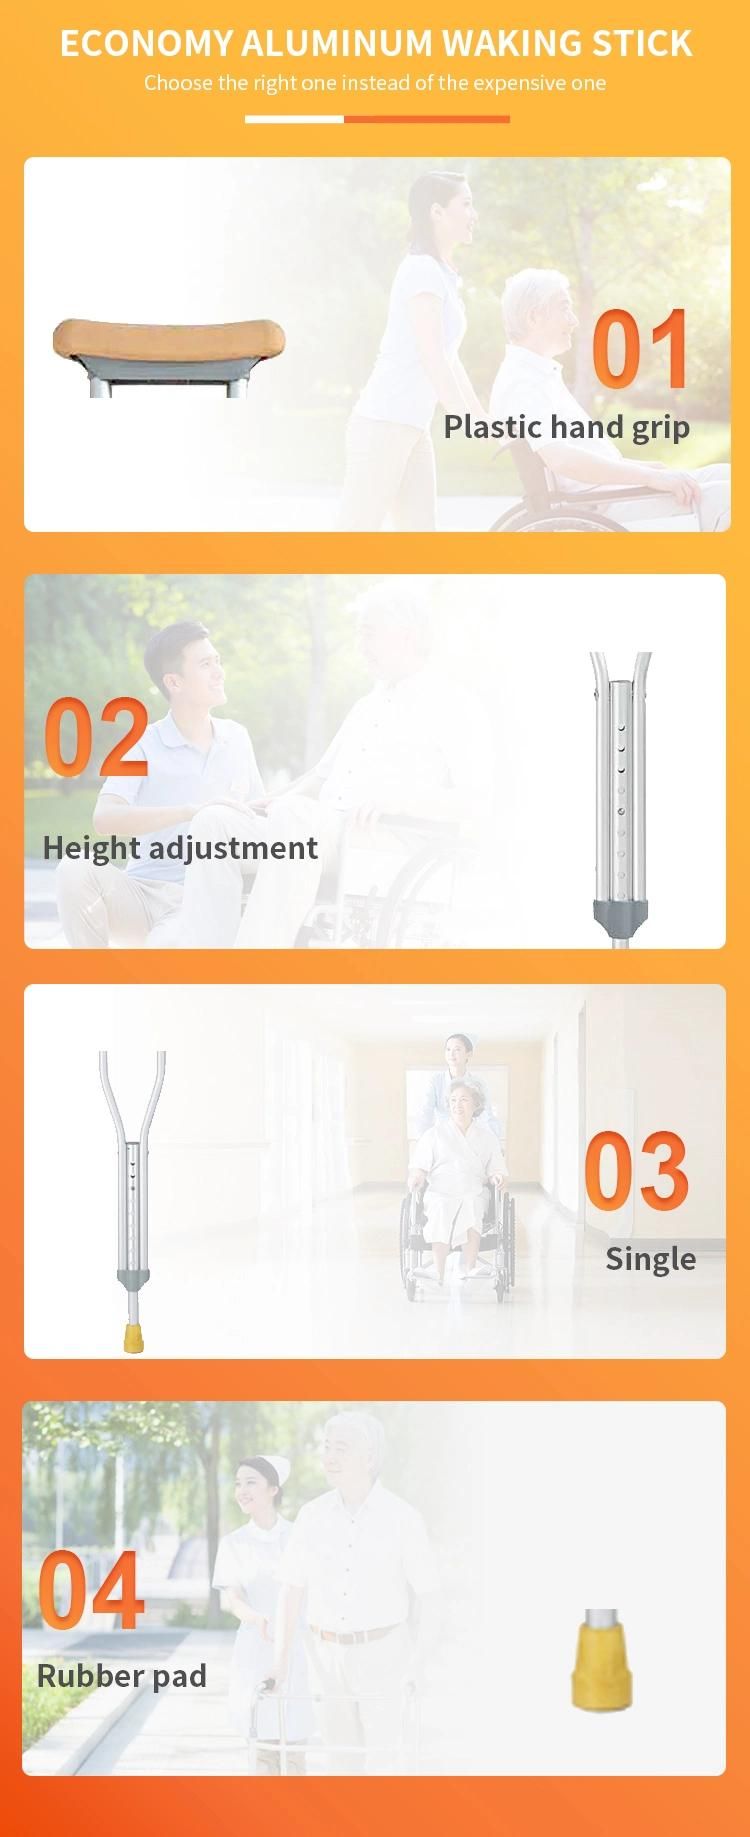 Foshan Aluminum Lightweight Can Adjustable Height Underarm Non-Slip Crutch Walker for Disabled People and Pregnant Woman